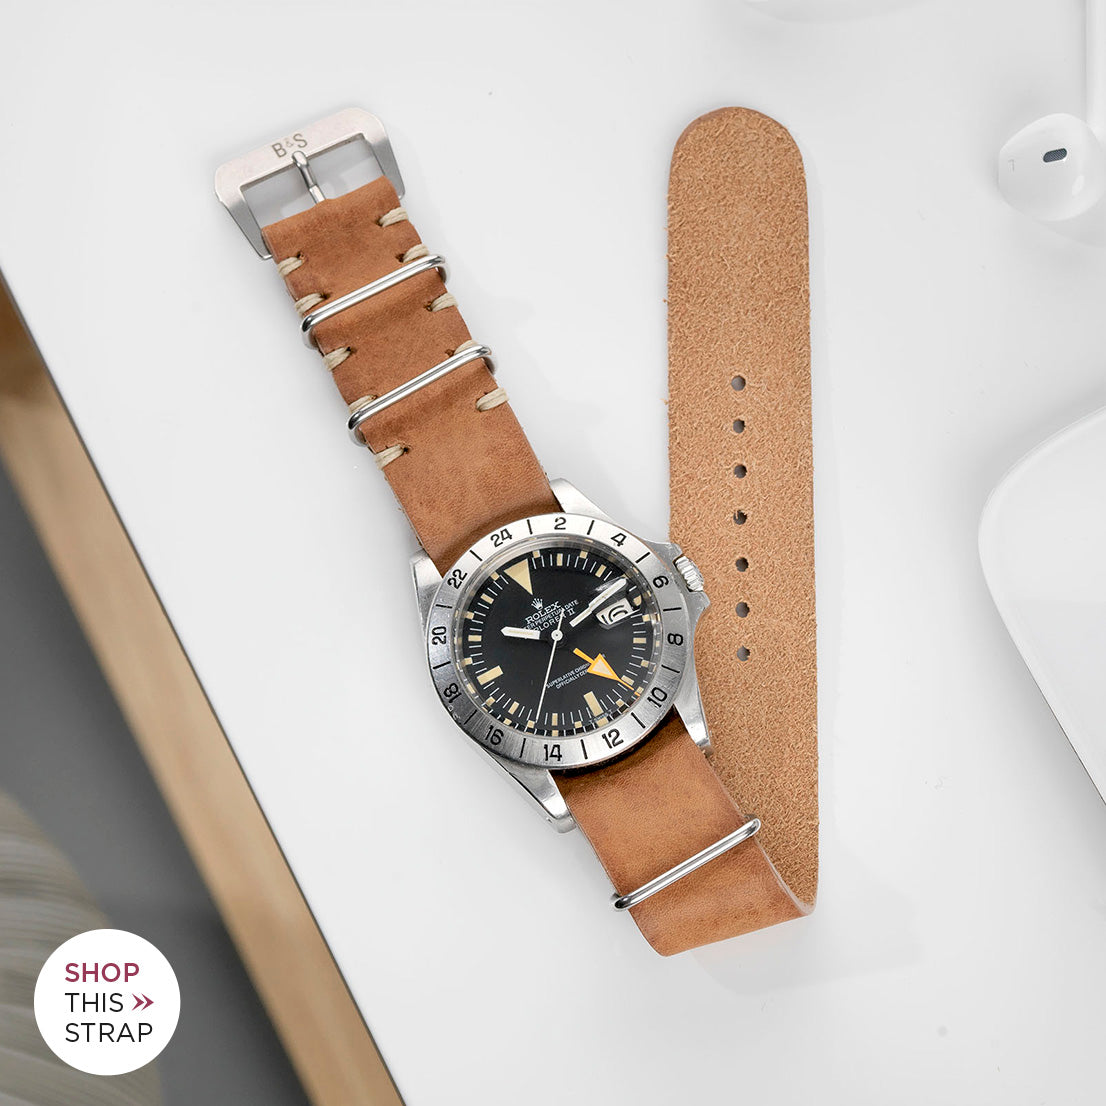 Bulang and Sons_Strap Guide_The Rolex 1655 Explorer Orange Hand_Caramel Brown Nato Leather Watch Strap